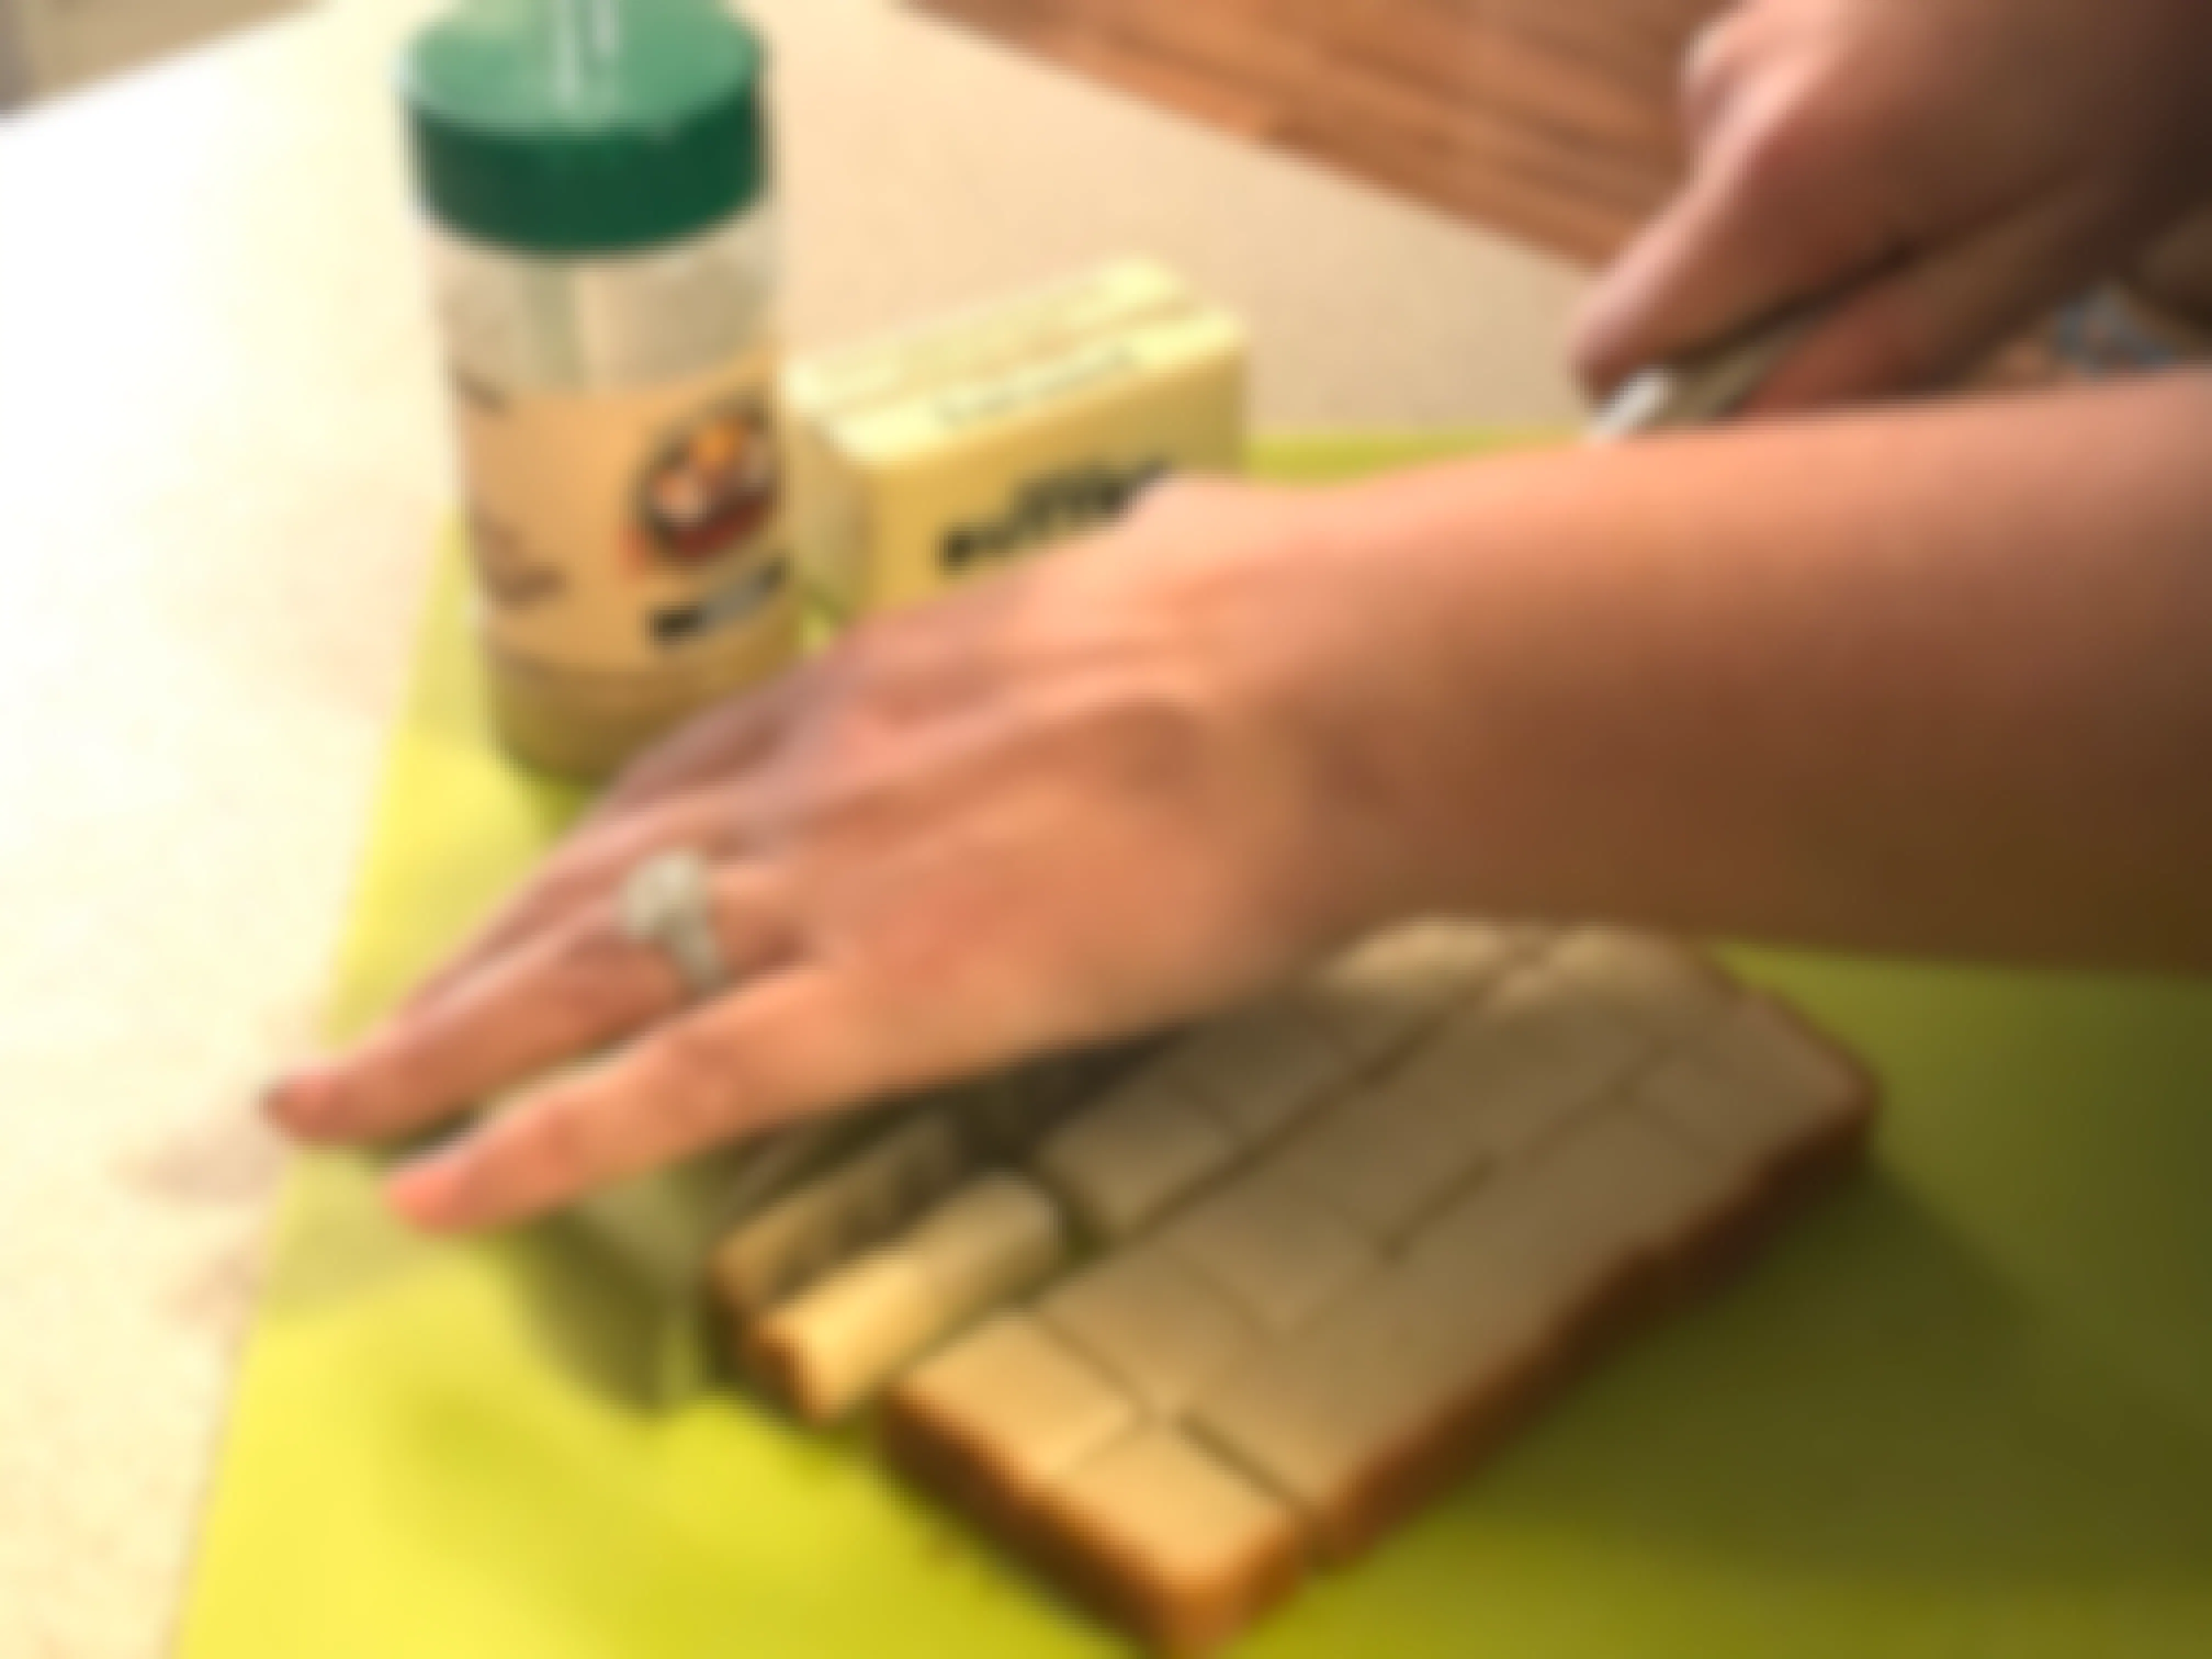 A person cutting up bread into cubes.